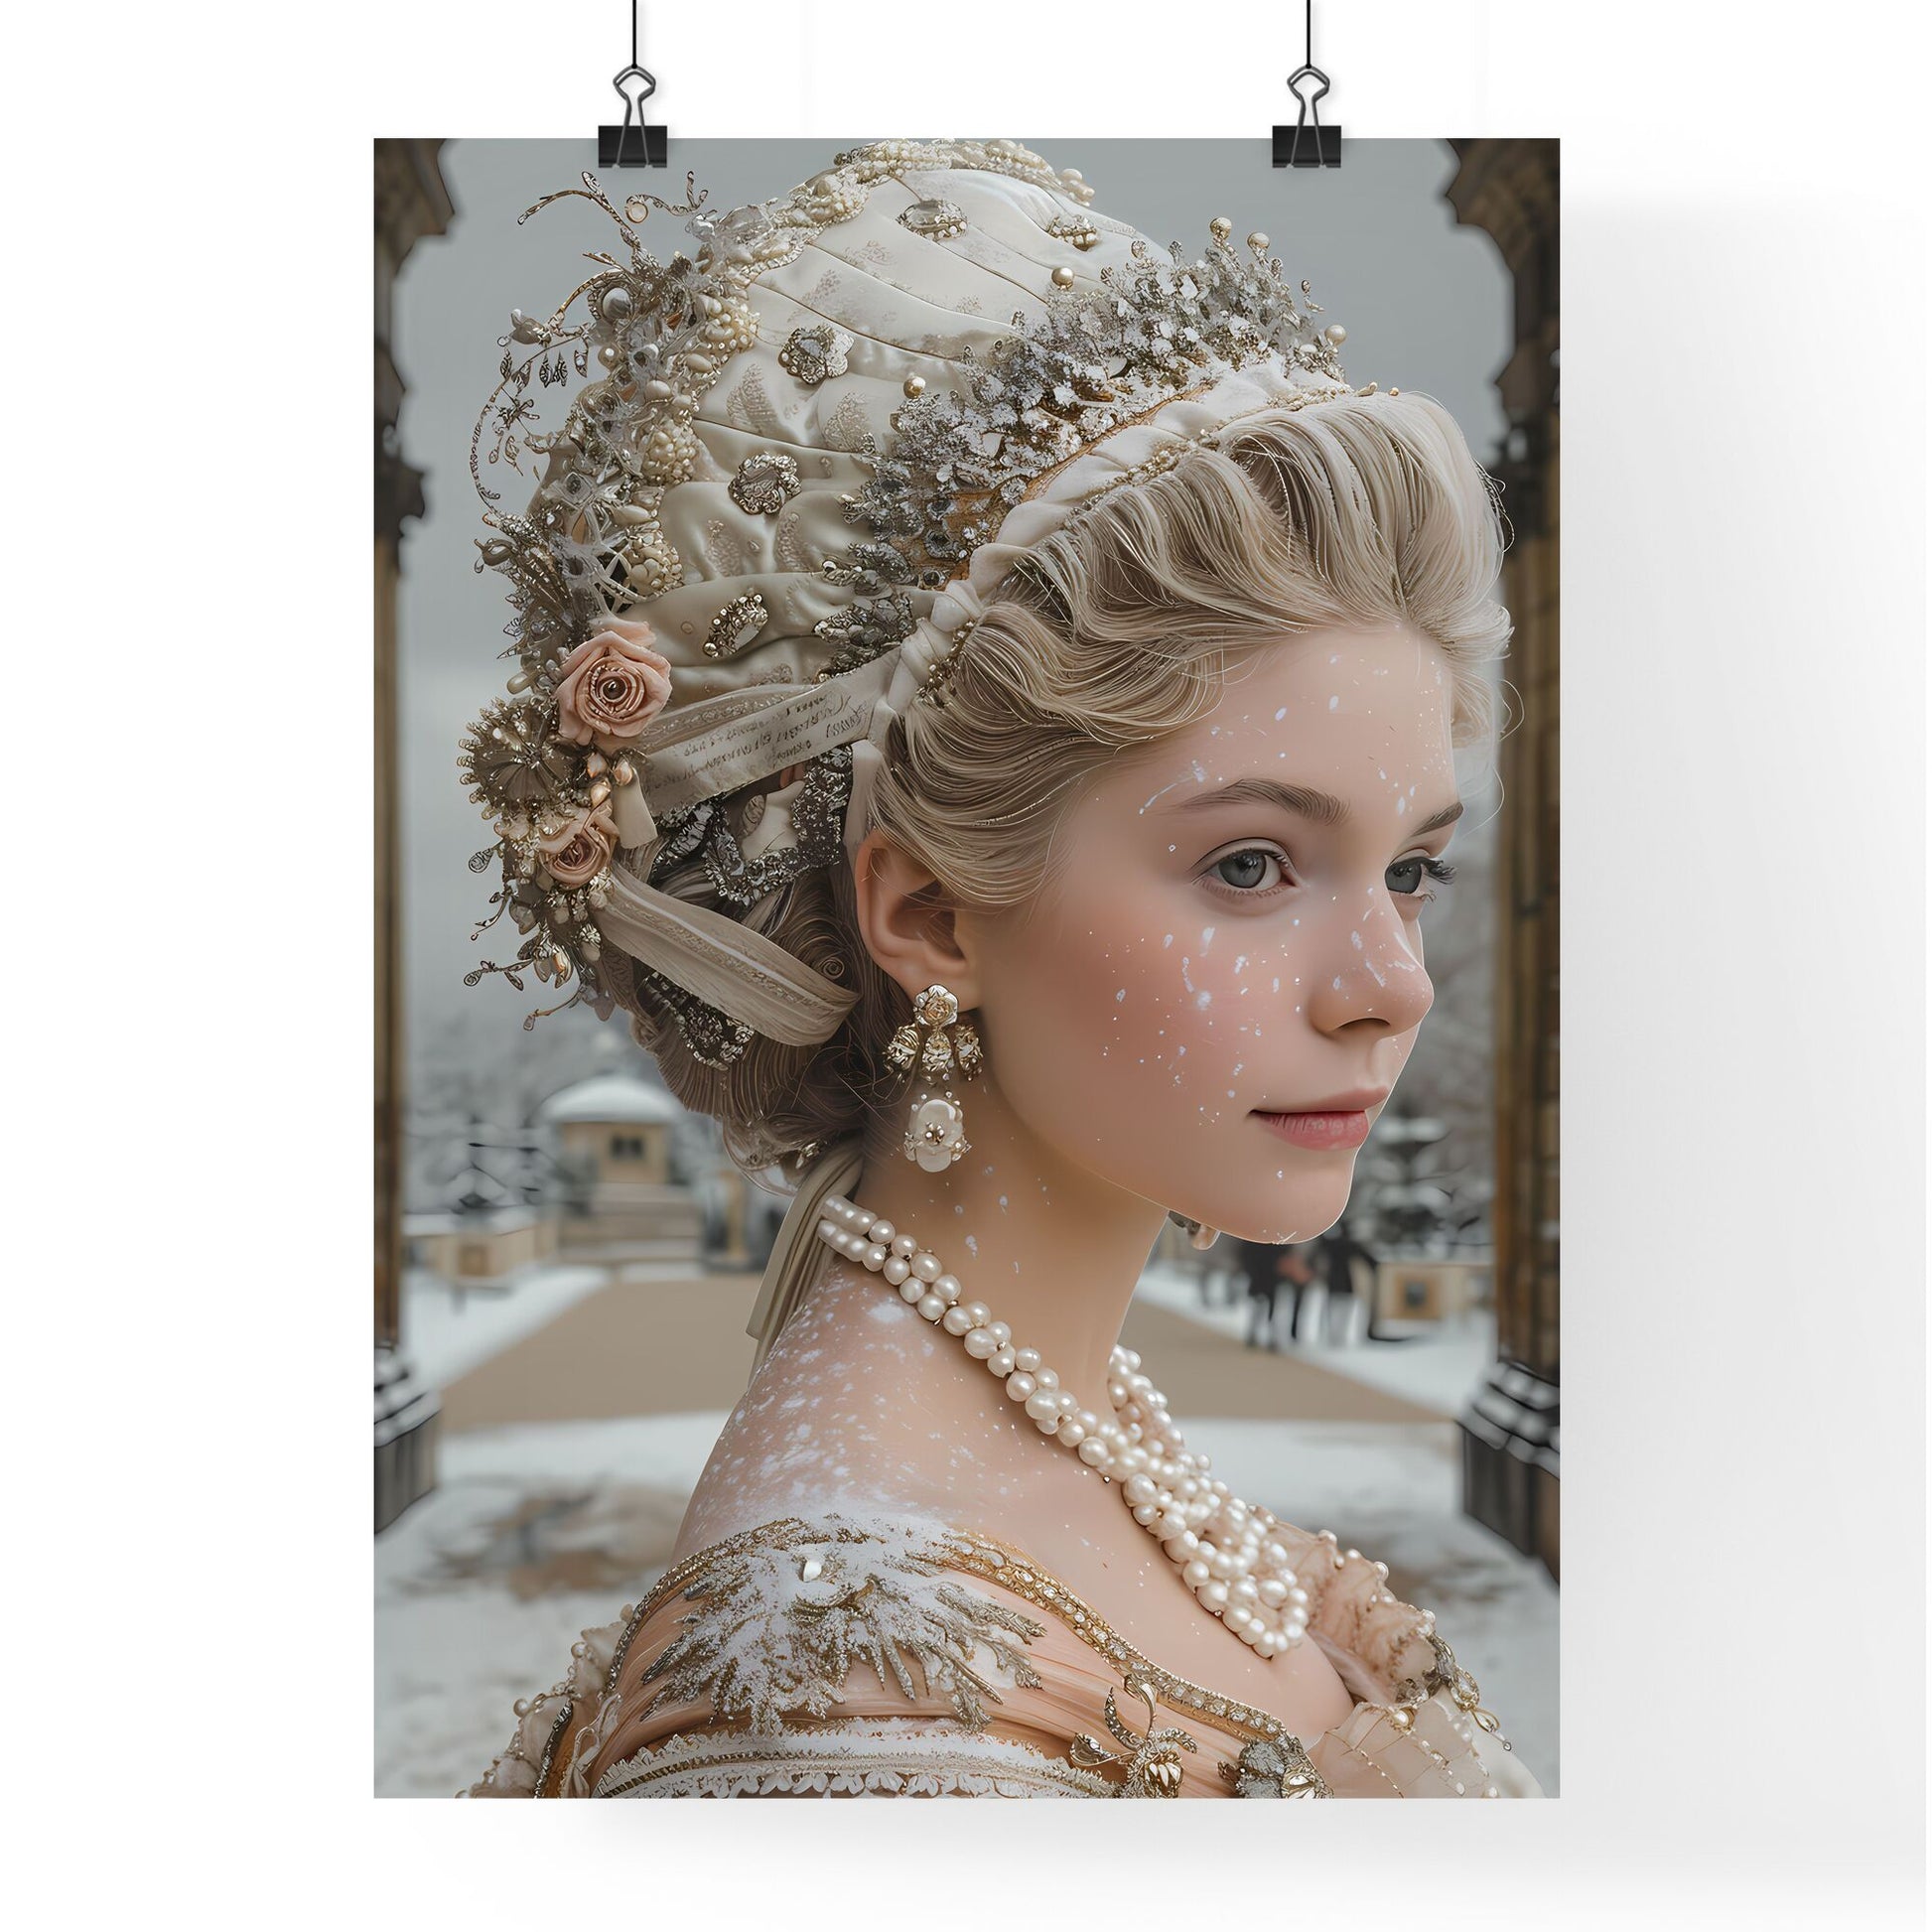 Majestic Melancholy: Marie Antoinette's Regal Sorrow in Versailles' Hall of Mirrors, Expressive Watercolor Painting, Textured Paper Artwork Default Title